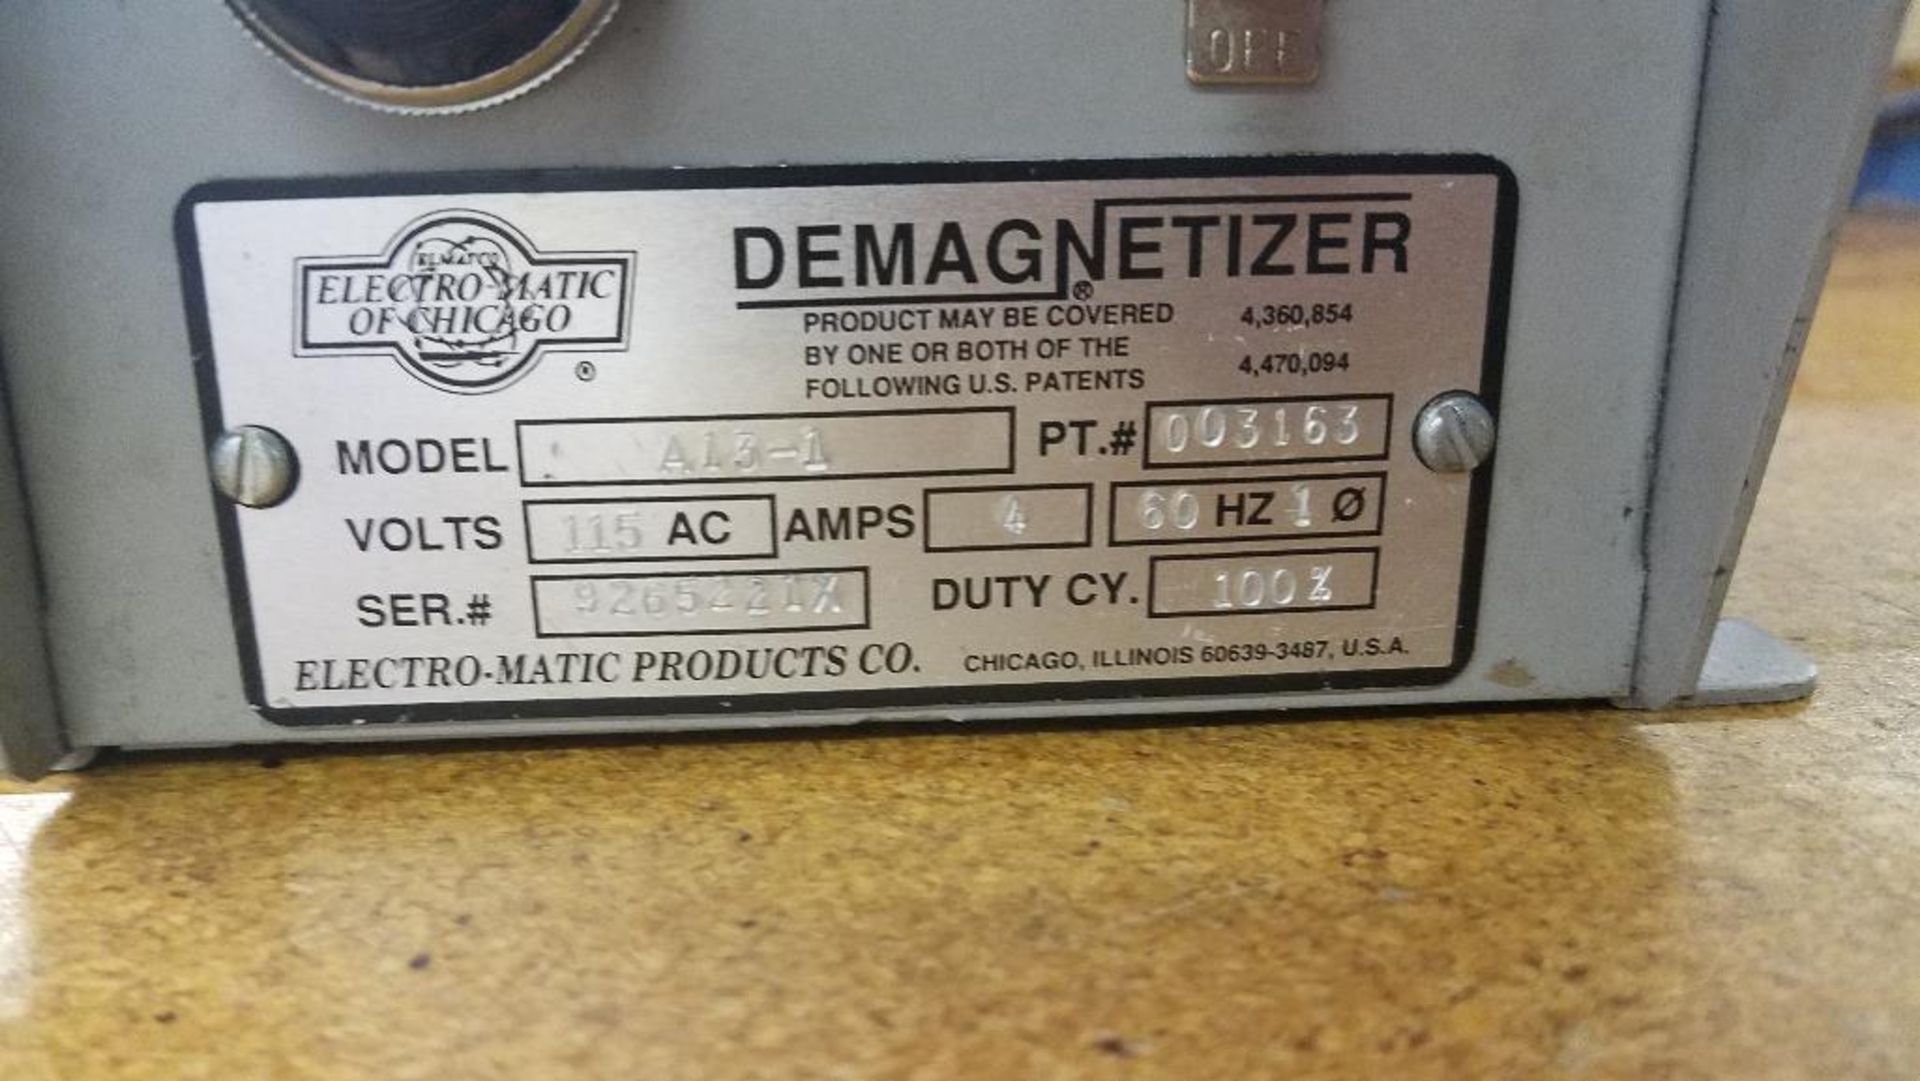 DESCRIPTION: ELECTRO MATIC DEMAGNETIZER A13-A ADDITIONAL INFORMATION: 115 VOLT, 1PHASE LOCATION: ASS - Image 2 of 2